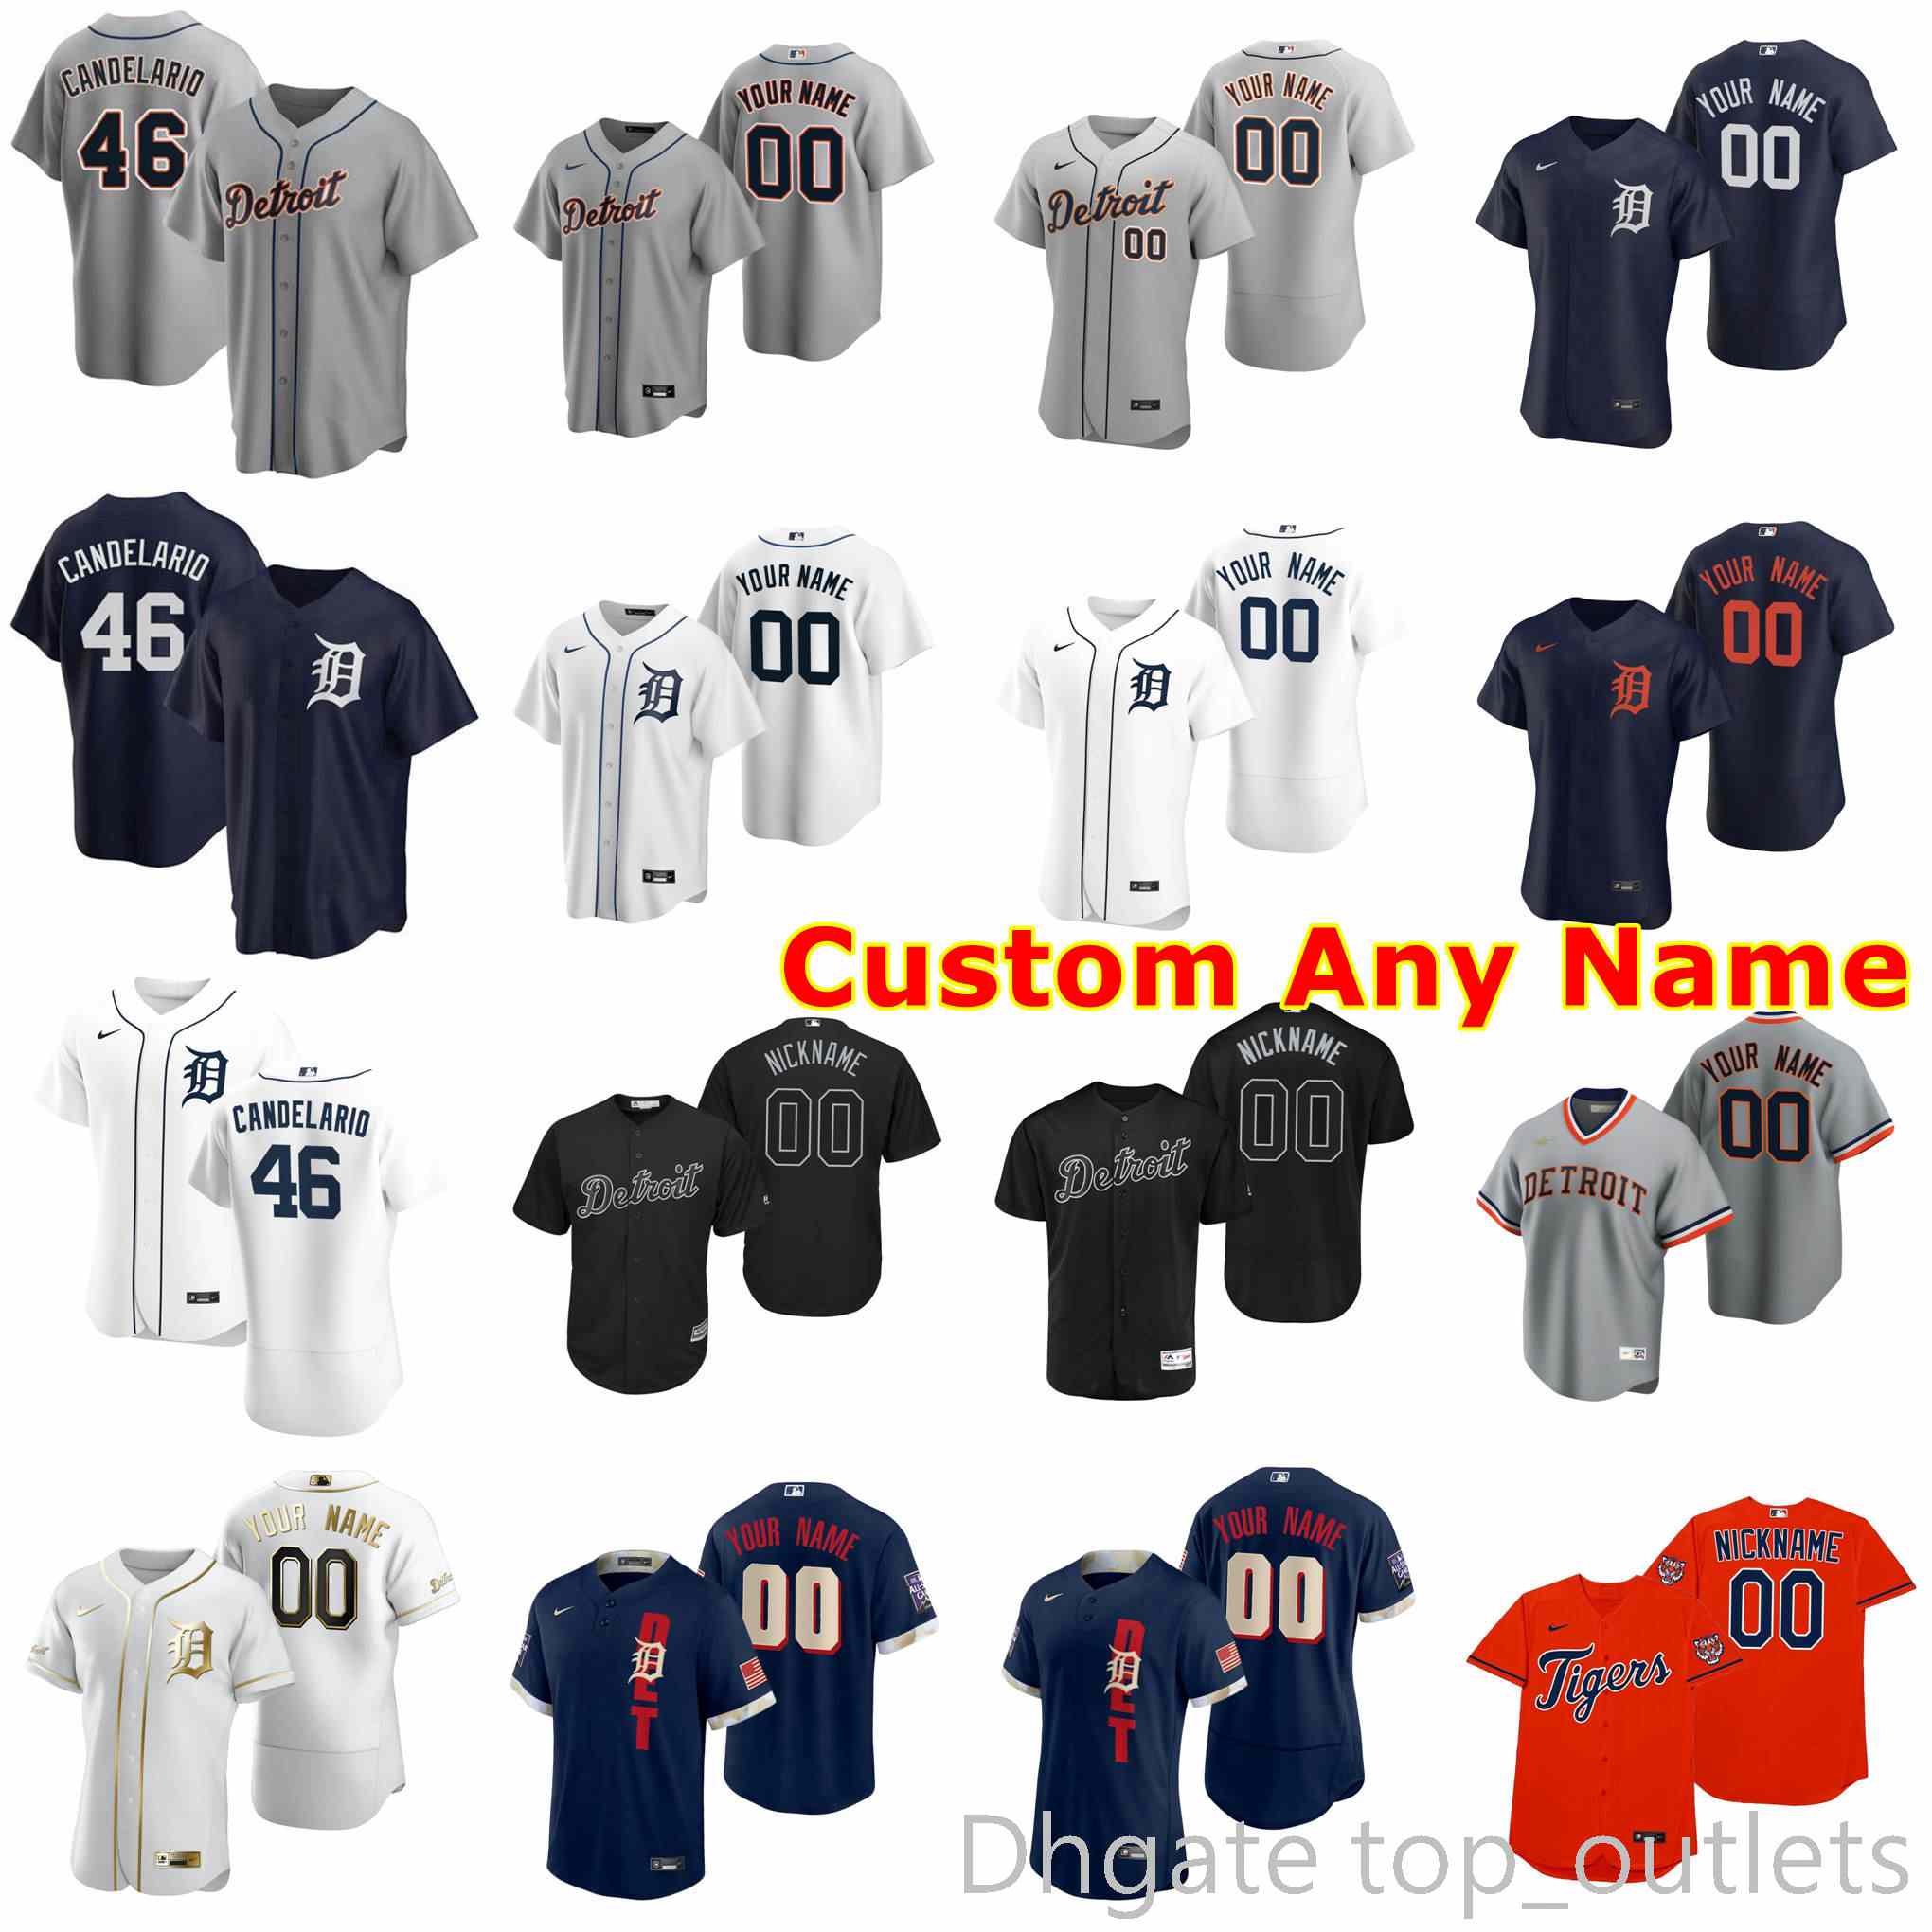 

2021 All Star Game Detroit Tigers Baseball Jerseys Men Nike MLB Jeimer Candelario Jersey Turnbull Kirk Gibson Miguel Cabrera Gregory Soto Schoop Custom Stitched, As photo